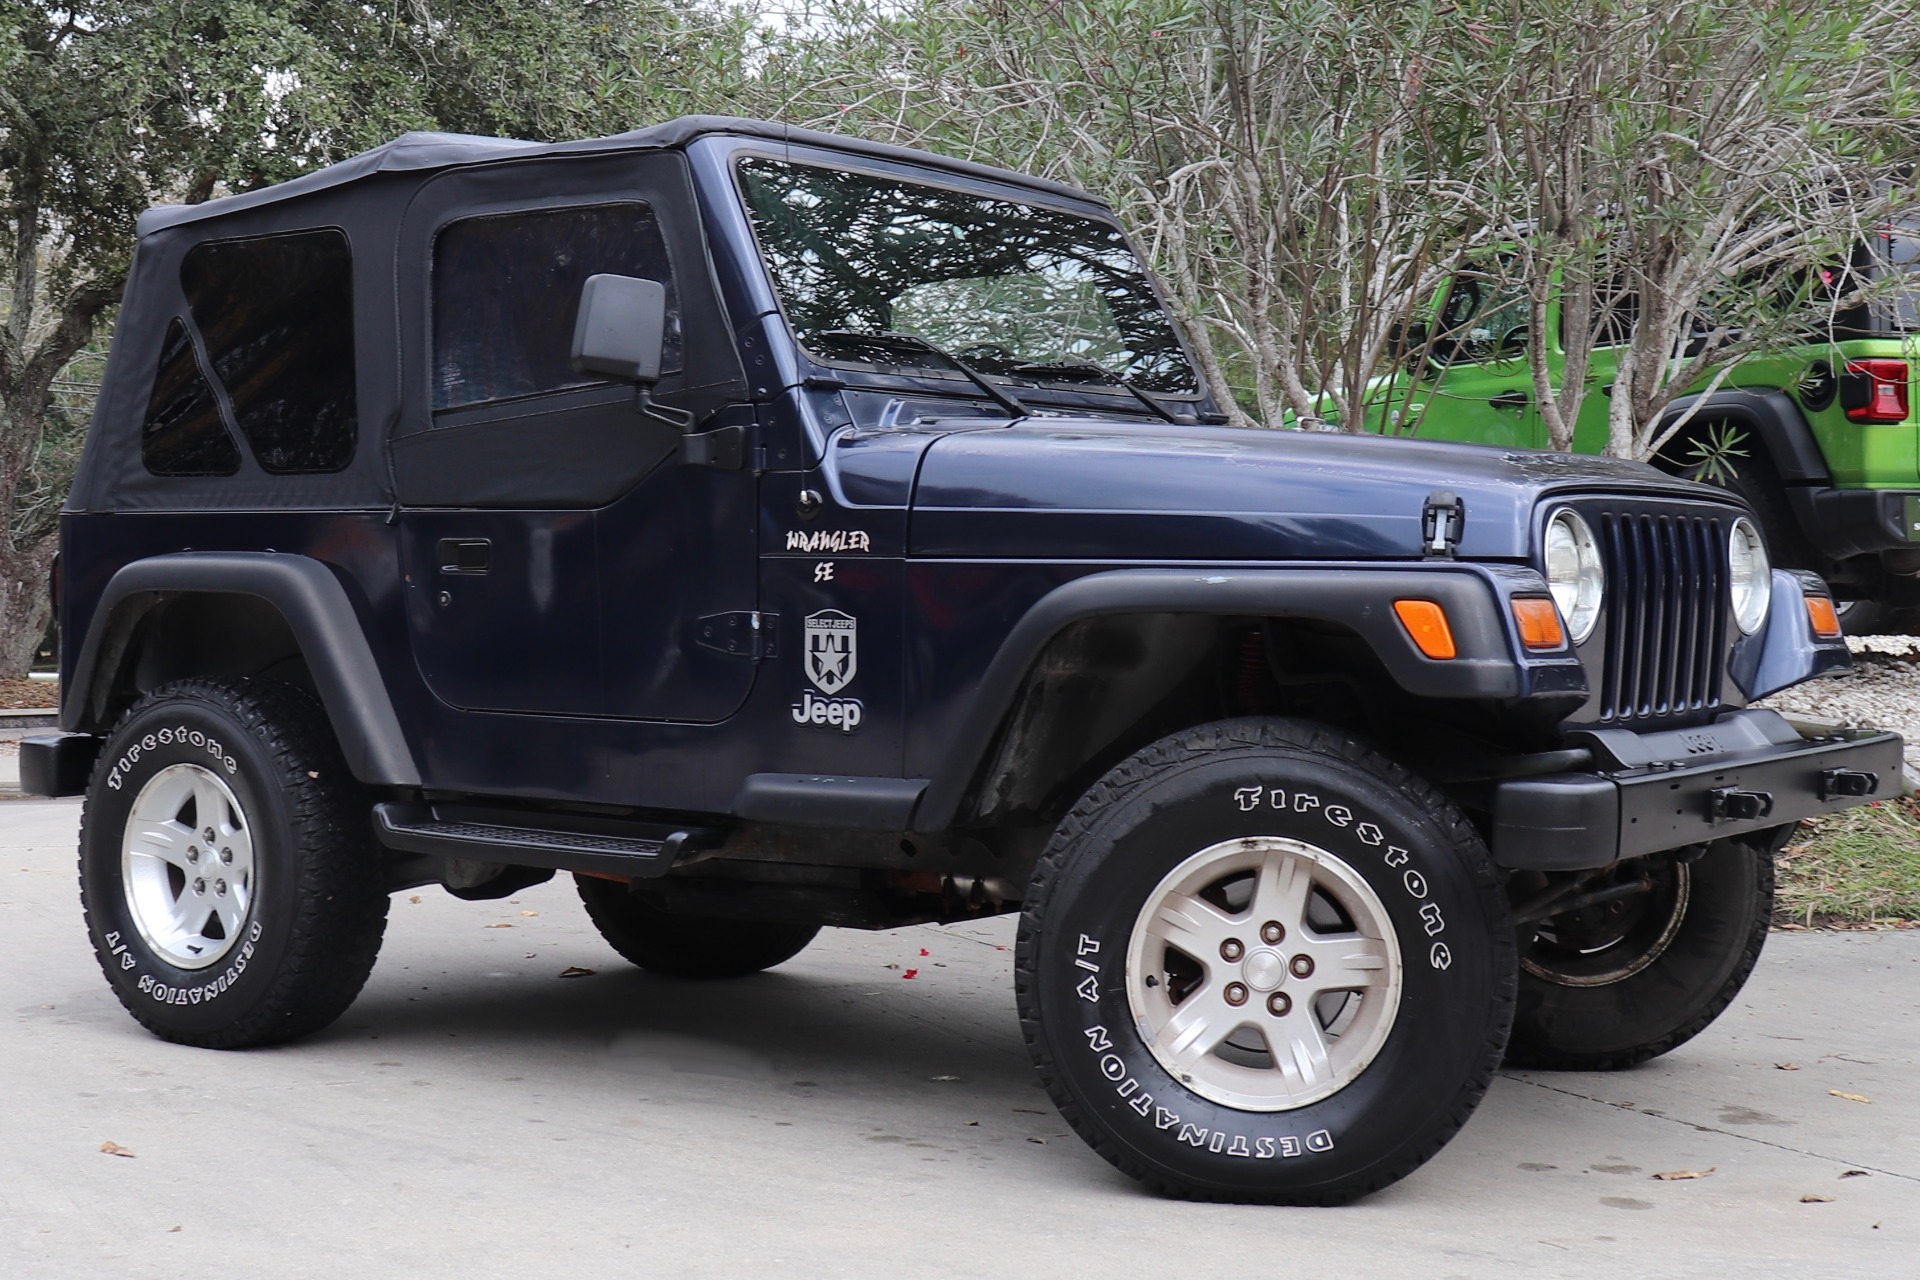 Used 1997 Jeep Wrangler SE For Sale ($7,995) | Select Jeeps Inc. Stock  #489643